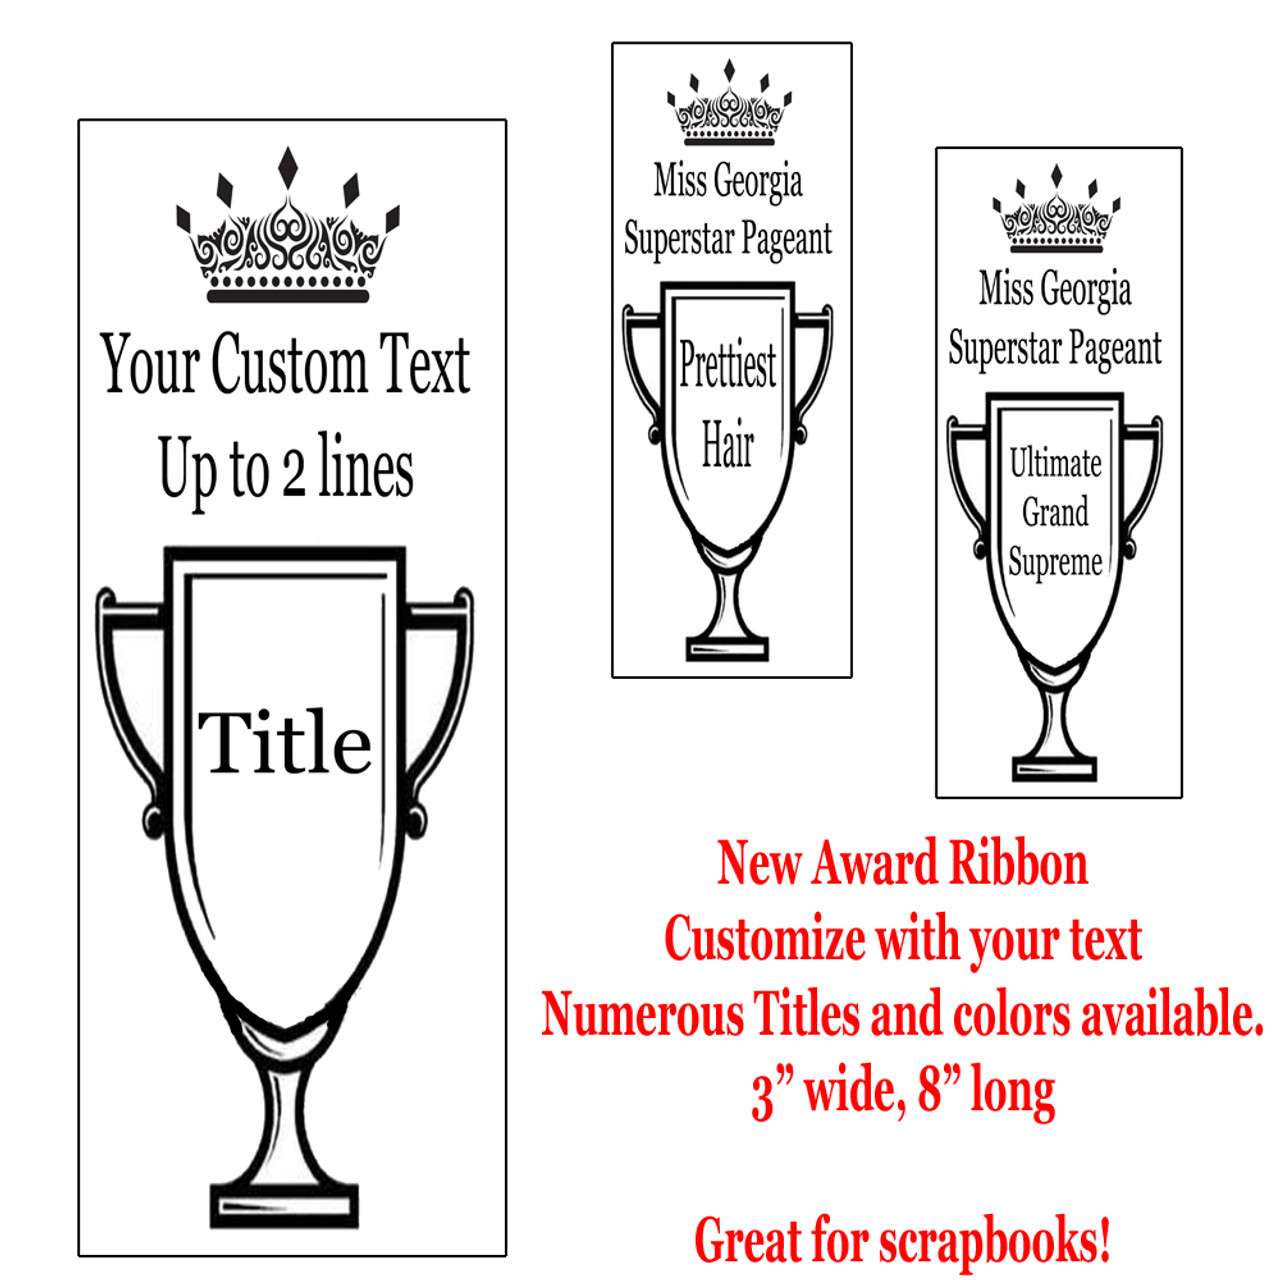 New Printed Award Ribbon - Available in multiple colors and titles